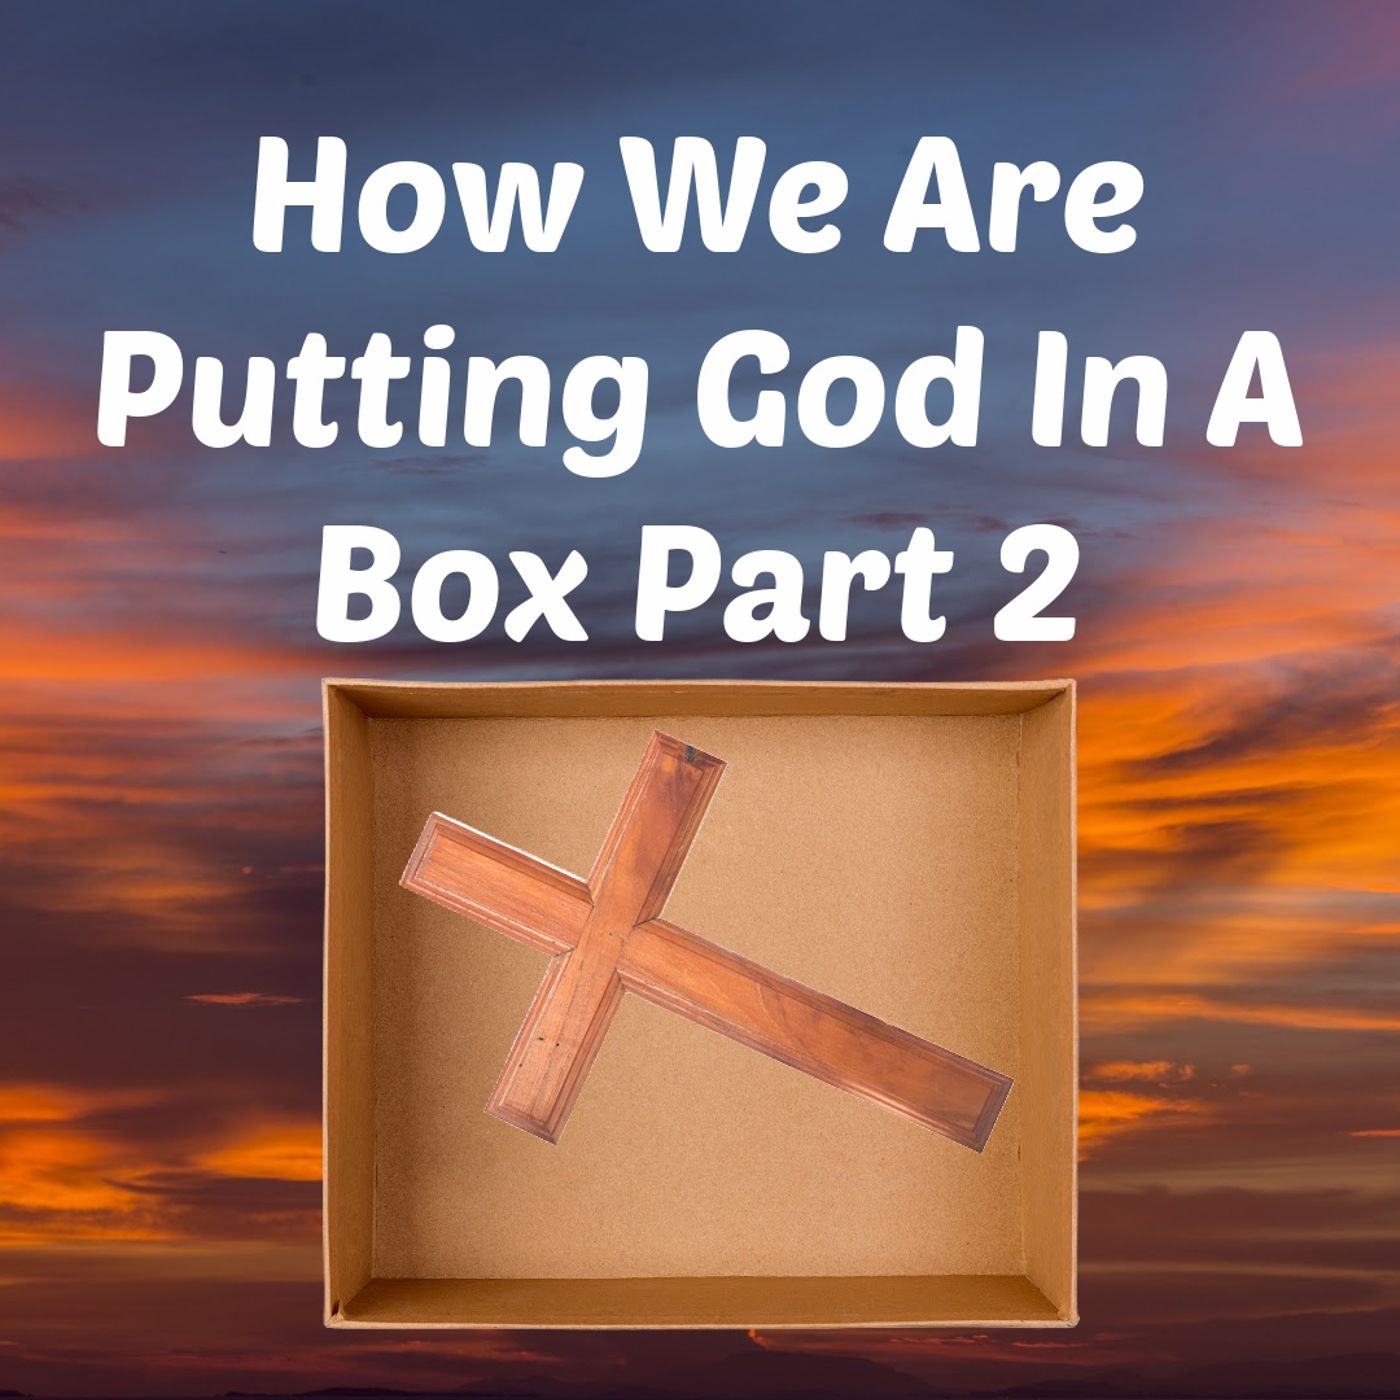 How We Are Putting God In A Box